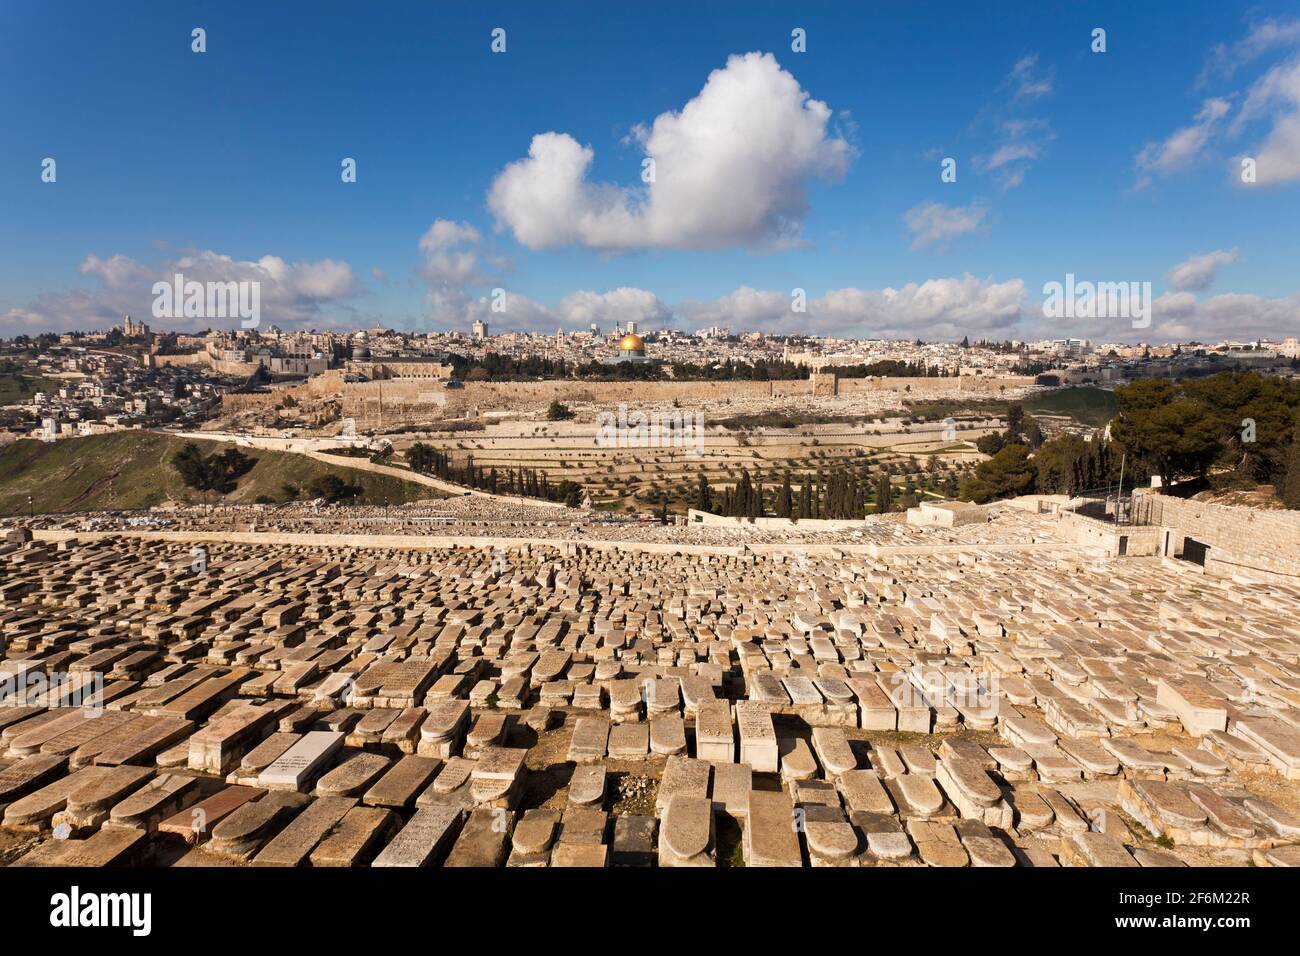 Israel, Jerusalem, view of the Old City of Jerusalem from Mount of Olives with Jewish cemetery Stock Photo